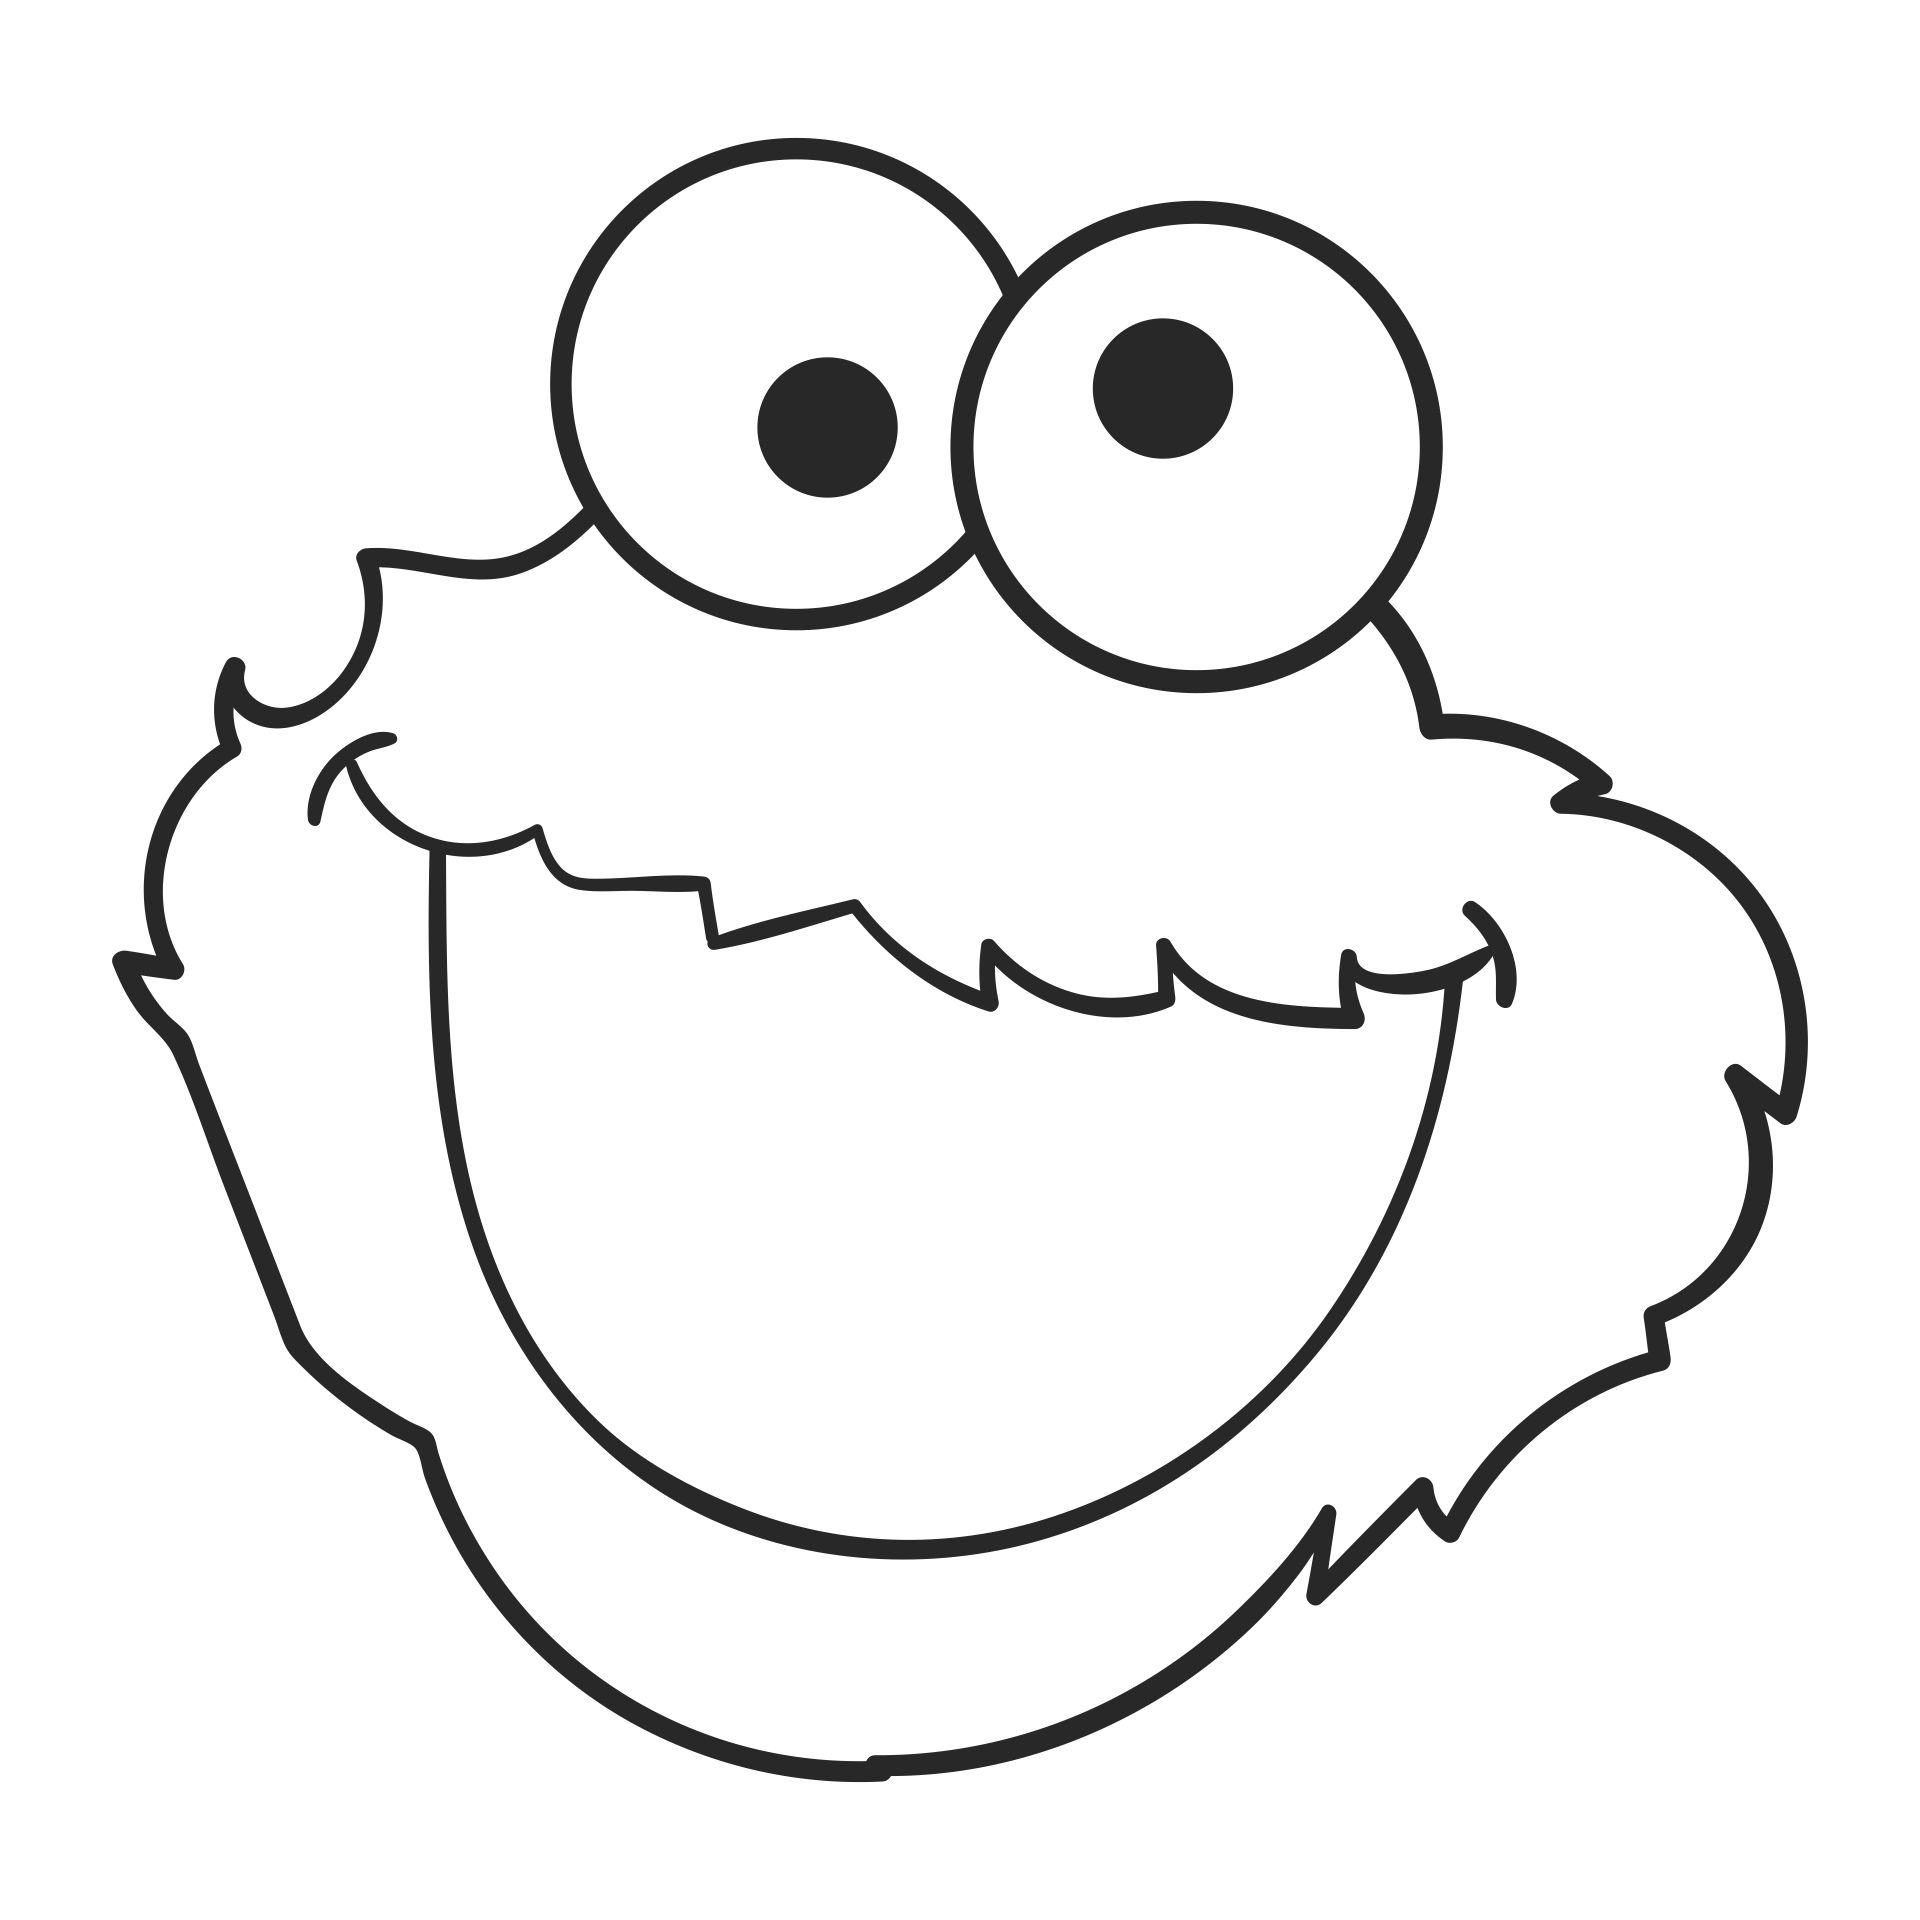 10-best-cookie-monster-face-template-printable-pdf-for-free-at-printablee